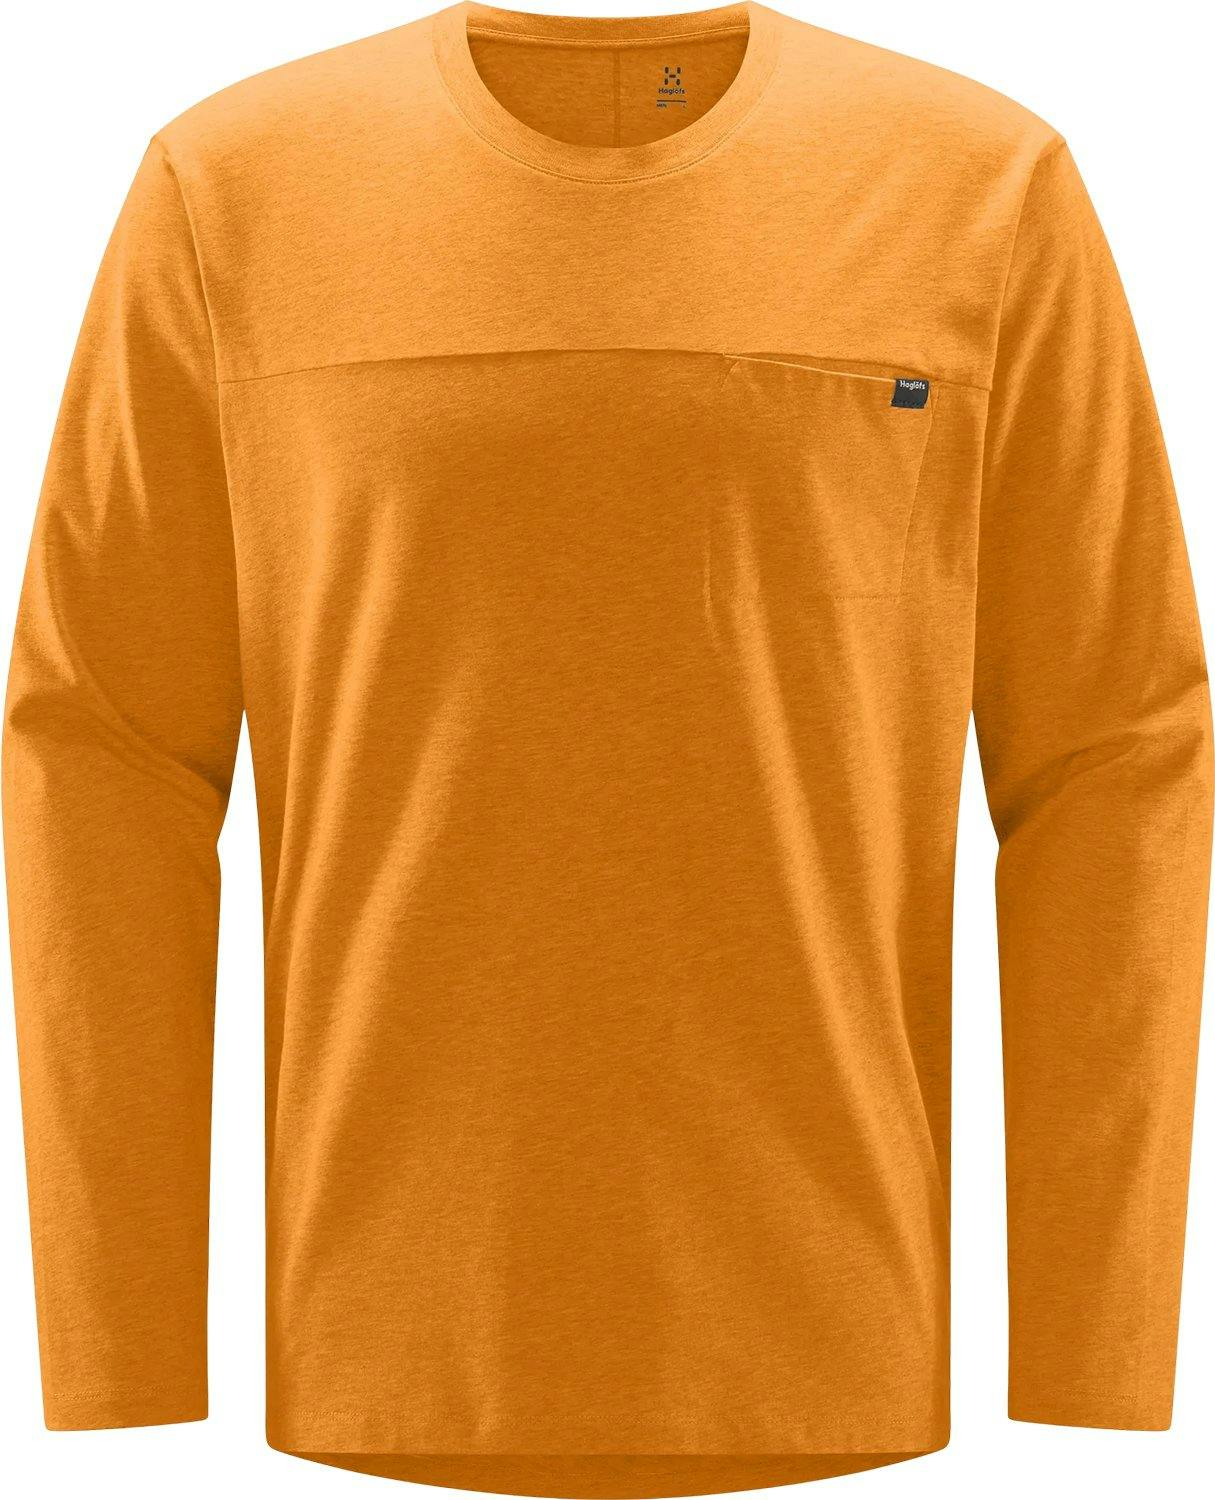 Product image for Curious Long Sleeve T-Shirt - Men's